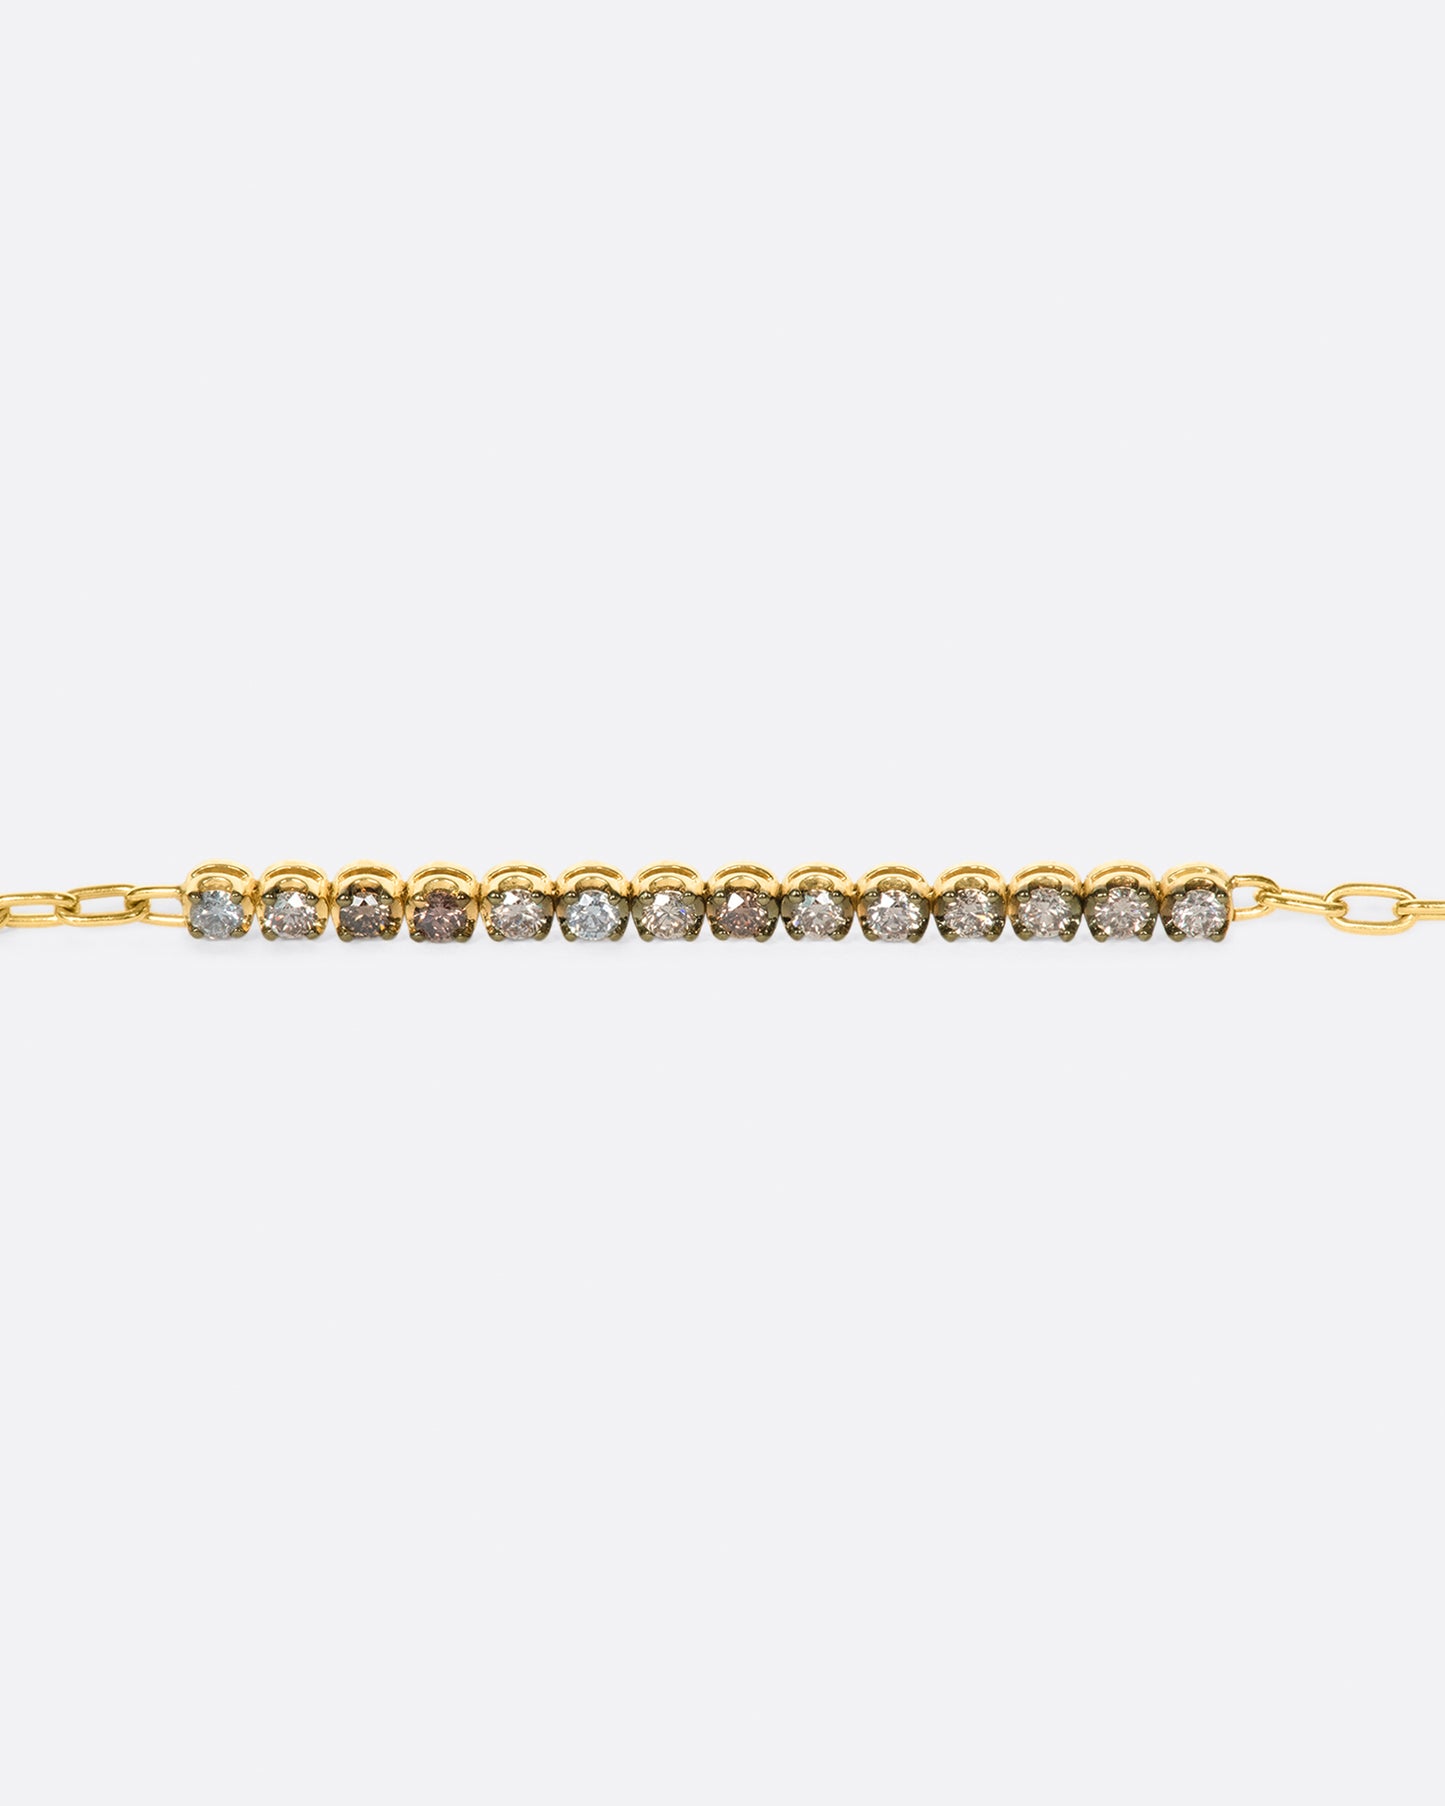 A partial tennis bracelet with a mix of light & dark champagne and gray diamonds set in darkened settings so they really glow.